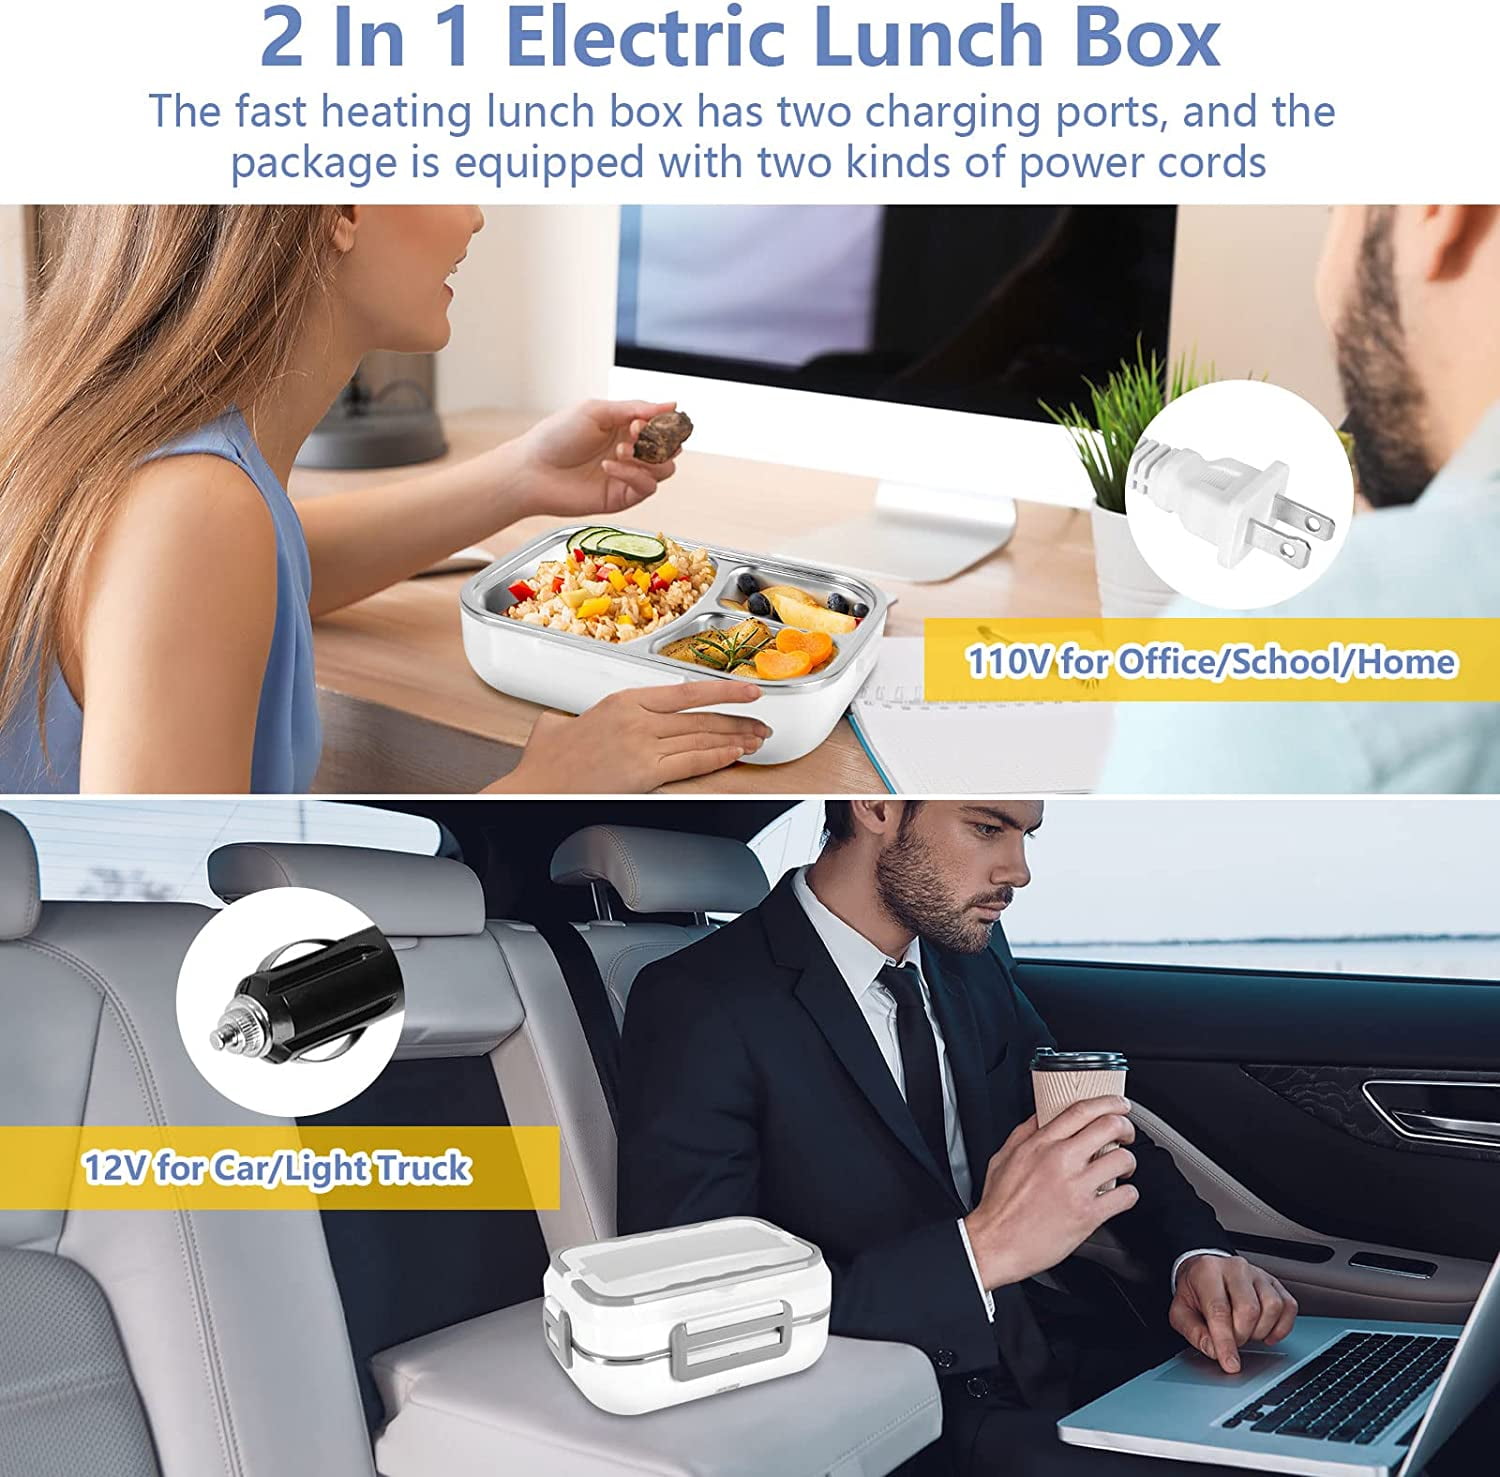 Better 4 You Electric Lunch Box – Food Heater Plug-In Lunch Box to Heat Lunch – Portable Food Warmer Car Lunch Box Warmer – Portable Electric